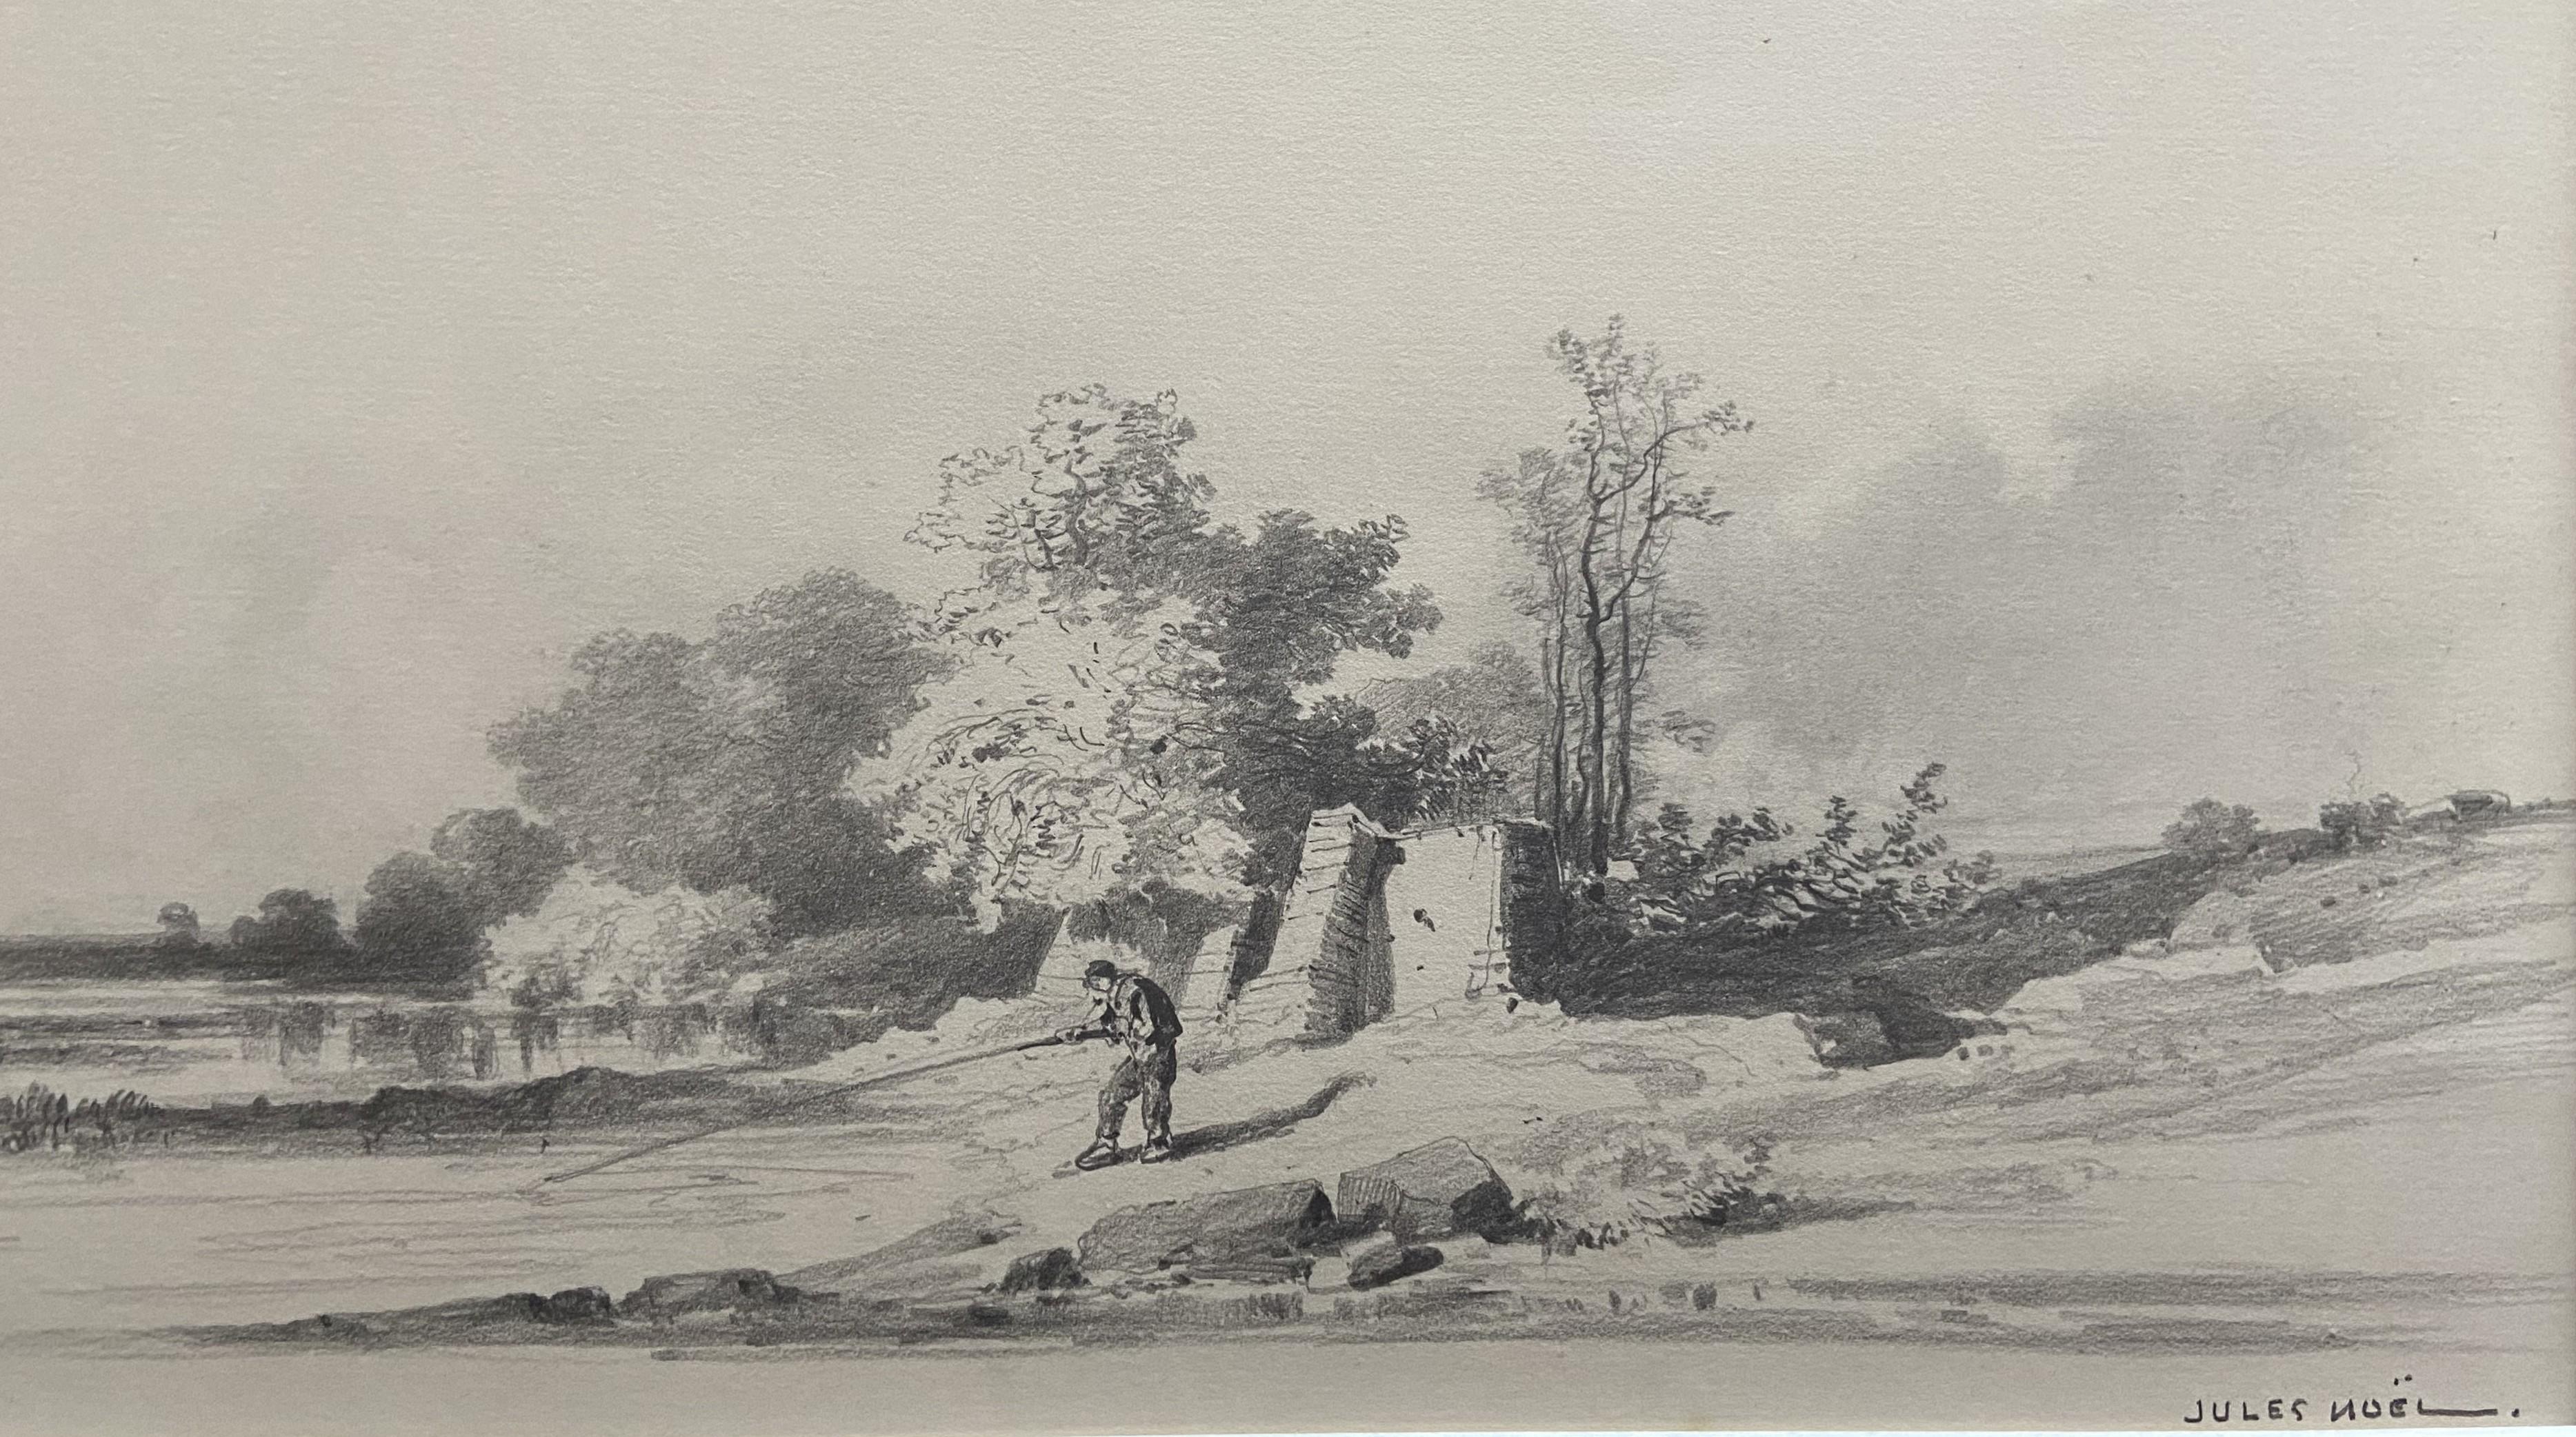 Jules Noel (1810-1881) 
Landscape with a fisherman, 
Signed  lower right
Pencil on paper
27.8 x 44 cm
Framed under glass : 43 x 59.5 cm

We find in this drawing everything that makes the talent and charm of Jules Noel's art: the way in which he